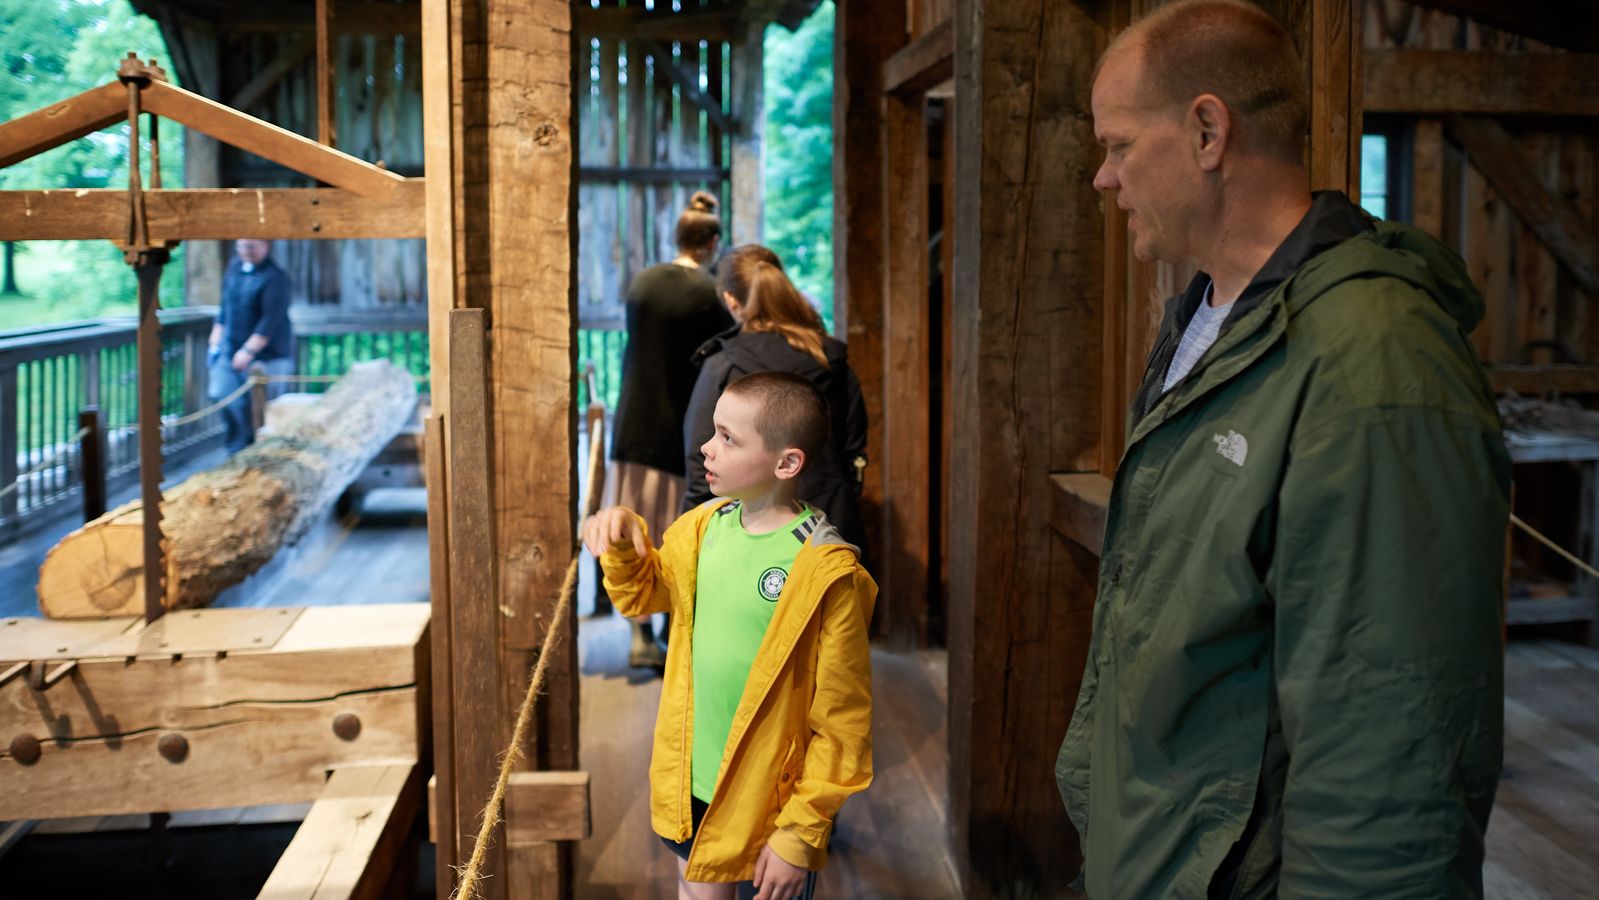 Standing inside a sawmill, a man and young boy look at a vertical saw in a wooden frame.  A long log is positioned in front of the saw’s teeth.  